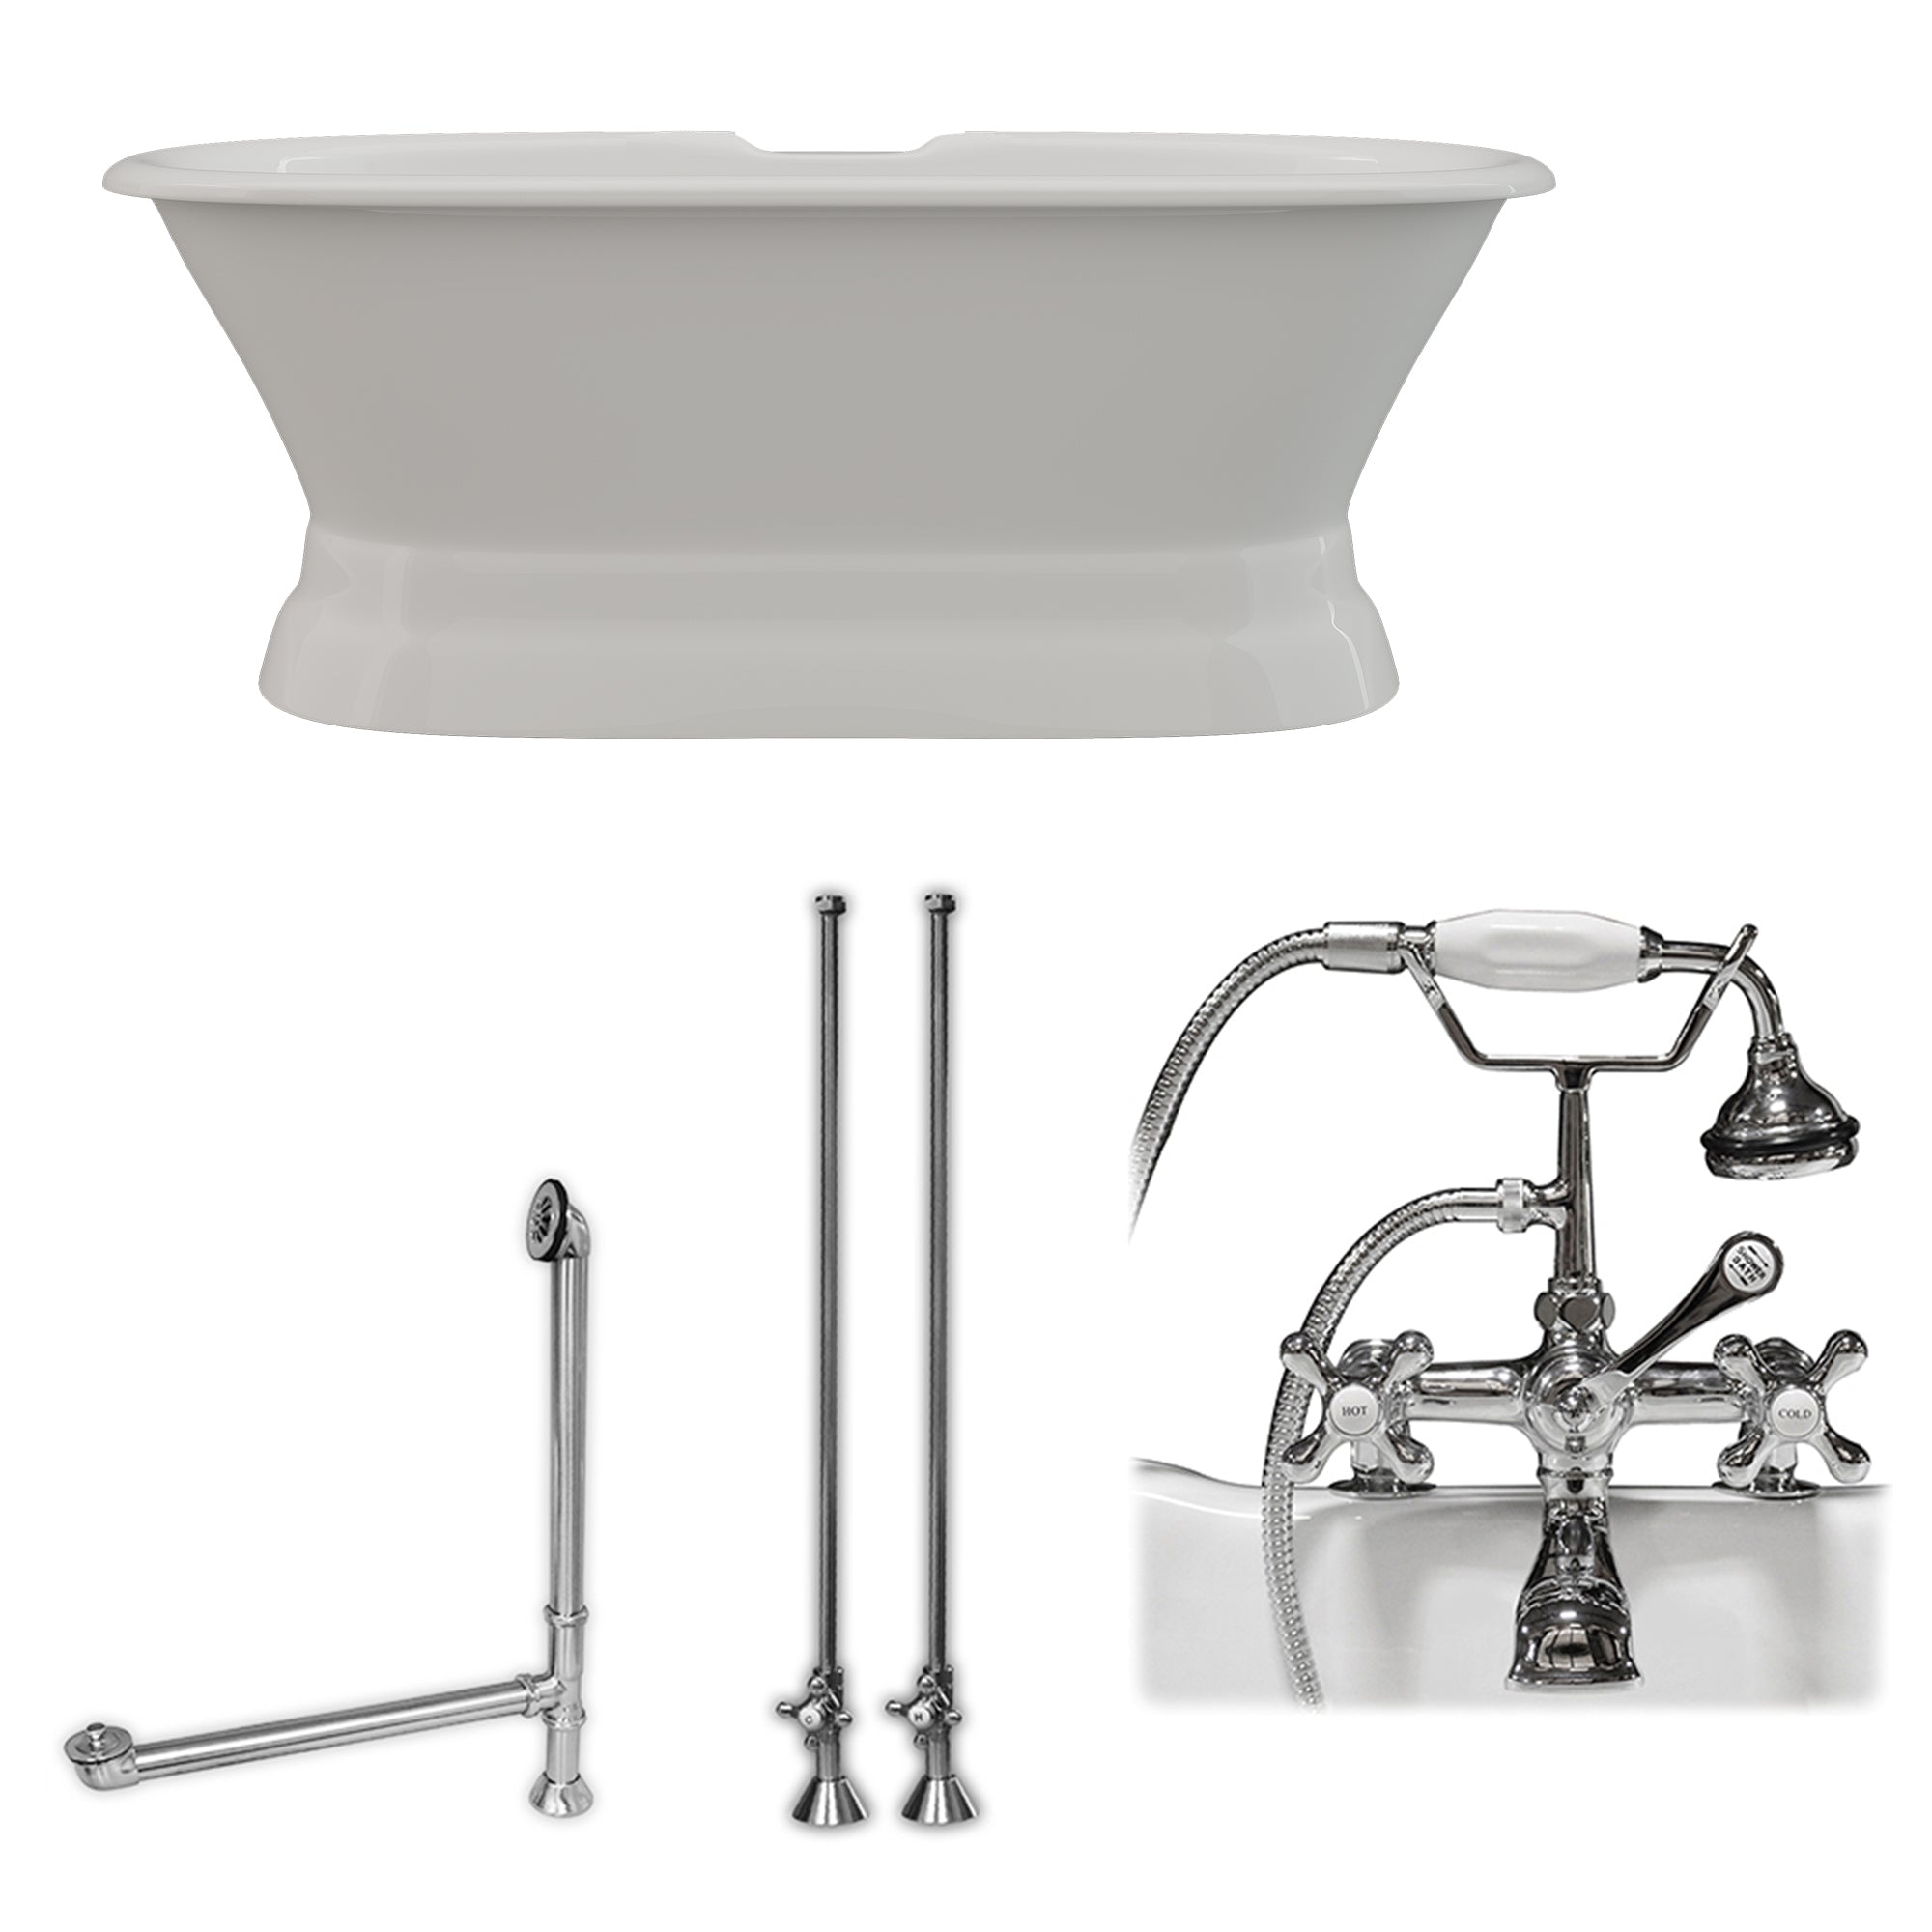 Cambridge Plumbing 66-Inch Double Ended Cast Iron Pedestal Soaking Tub (Porcelain interior and white paint exterior) and Complete Deck Mount Plumbing Package (Brushed nickel) DE66-PED-463D-2-PKG-DH - Vital Hydrotherapy